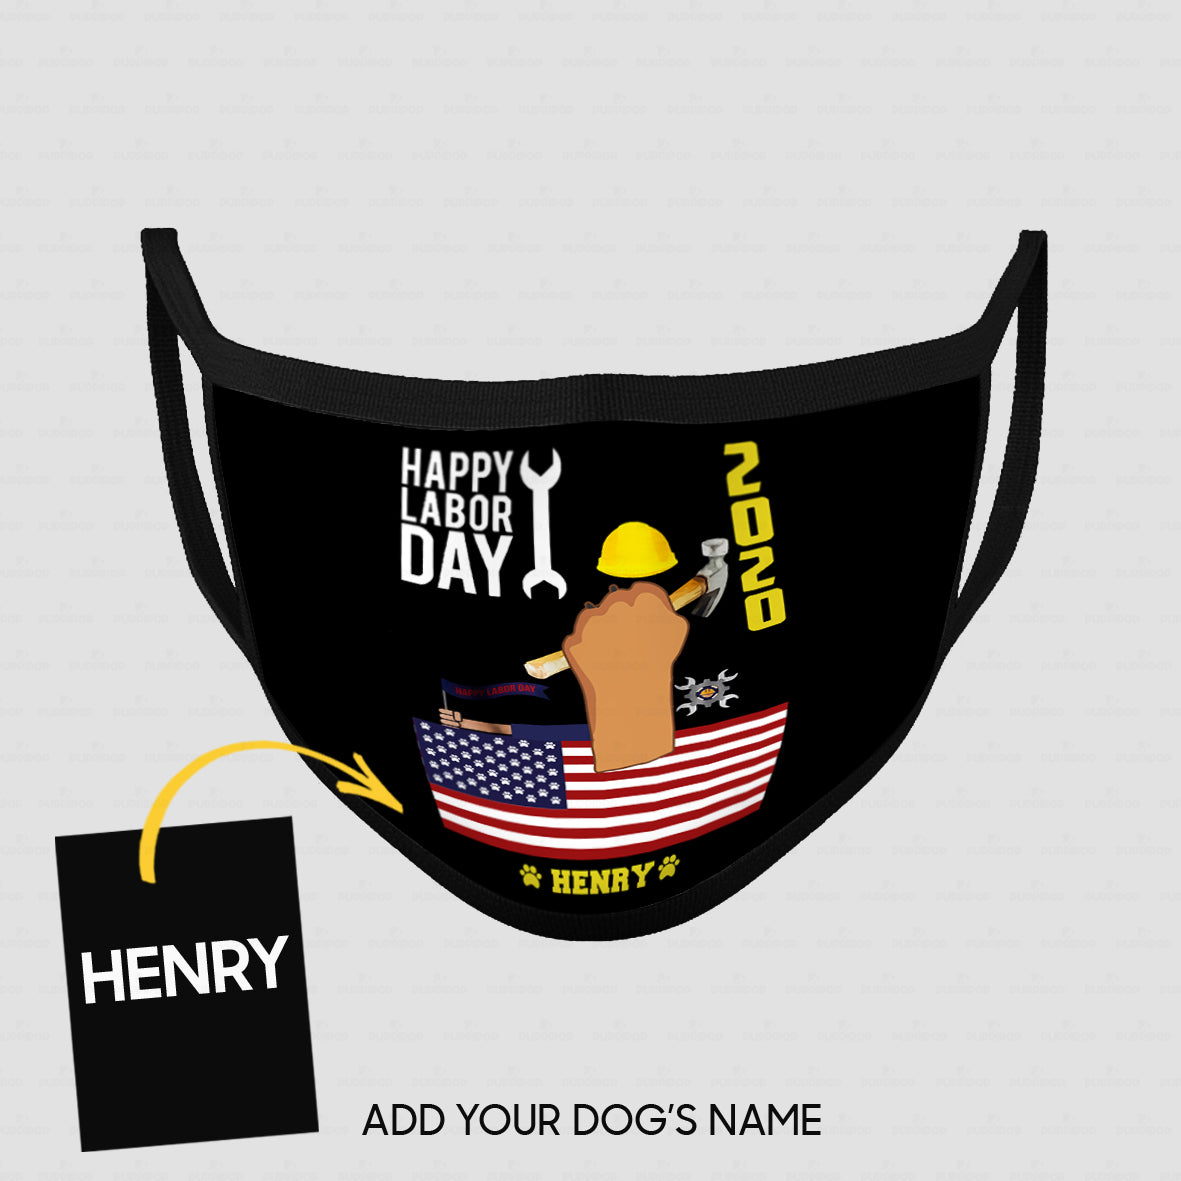 Personalized Dog Gift Idea - Happy Labor Day 2020 For Dog Lovers - Cloth Mask